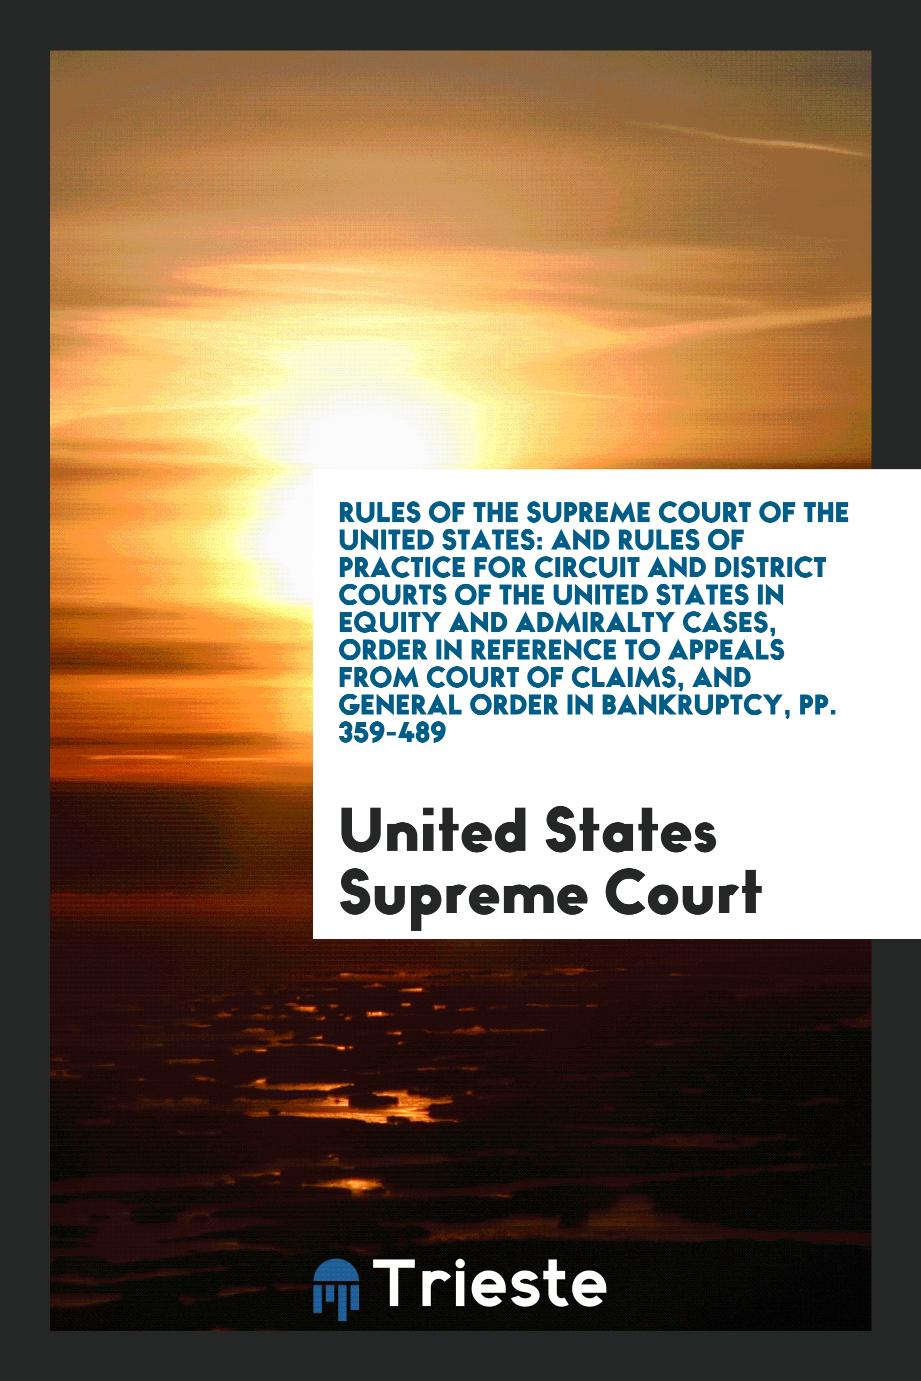 Rules of the Supreme Court of the United States: And Rules of Practice for Circuit and District Courts of the United States in Equity and Admiralty Cases, Order in Reference to Appeals from Court of Claims, and General Order in Bankruptcy, pp. 359-489